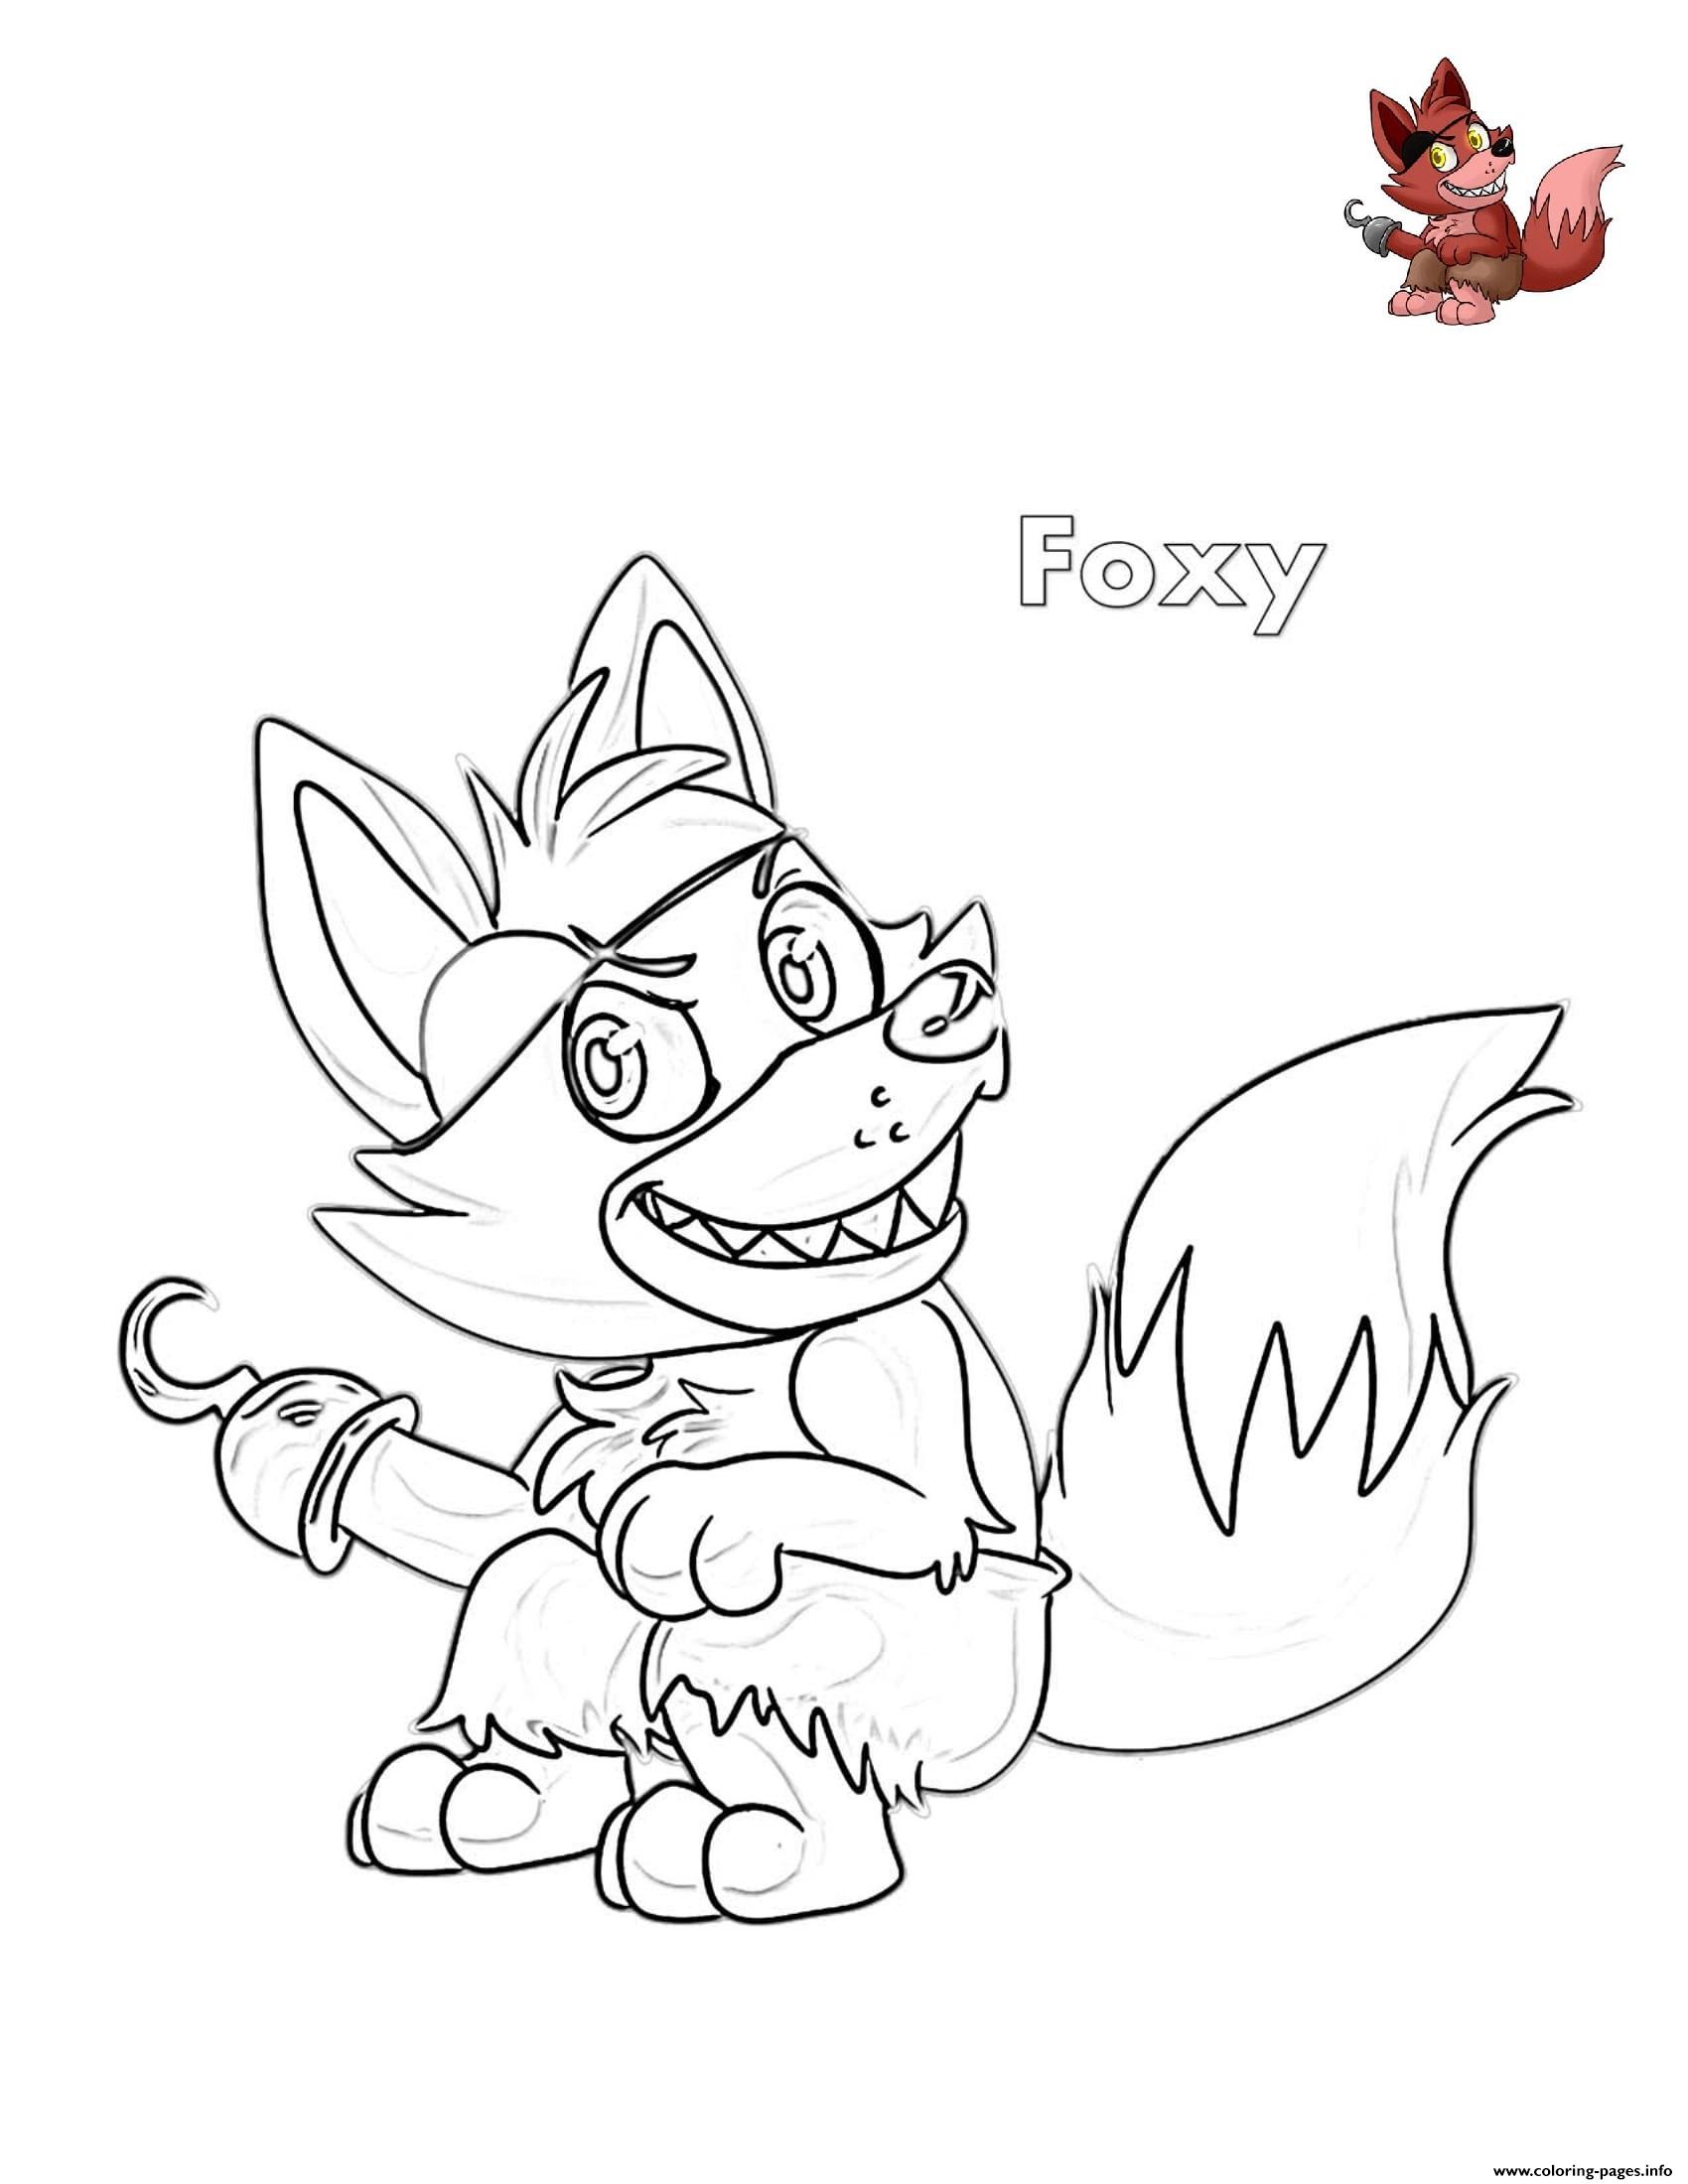 Fnaf Foxy Coloring Pages at GetDrawings | Free download